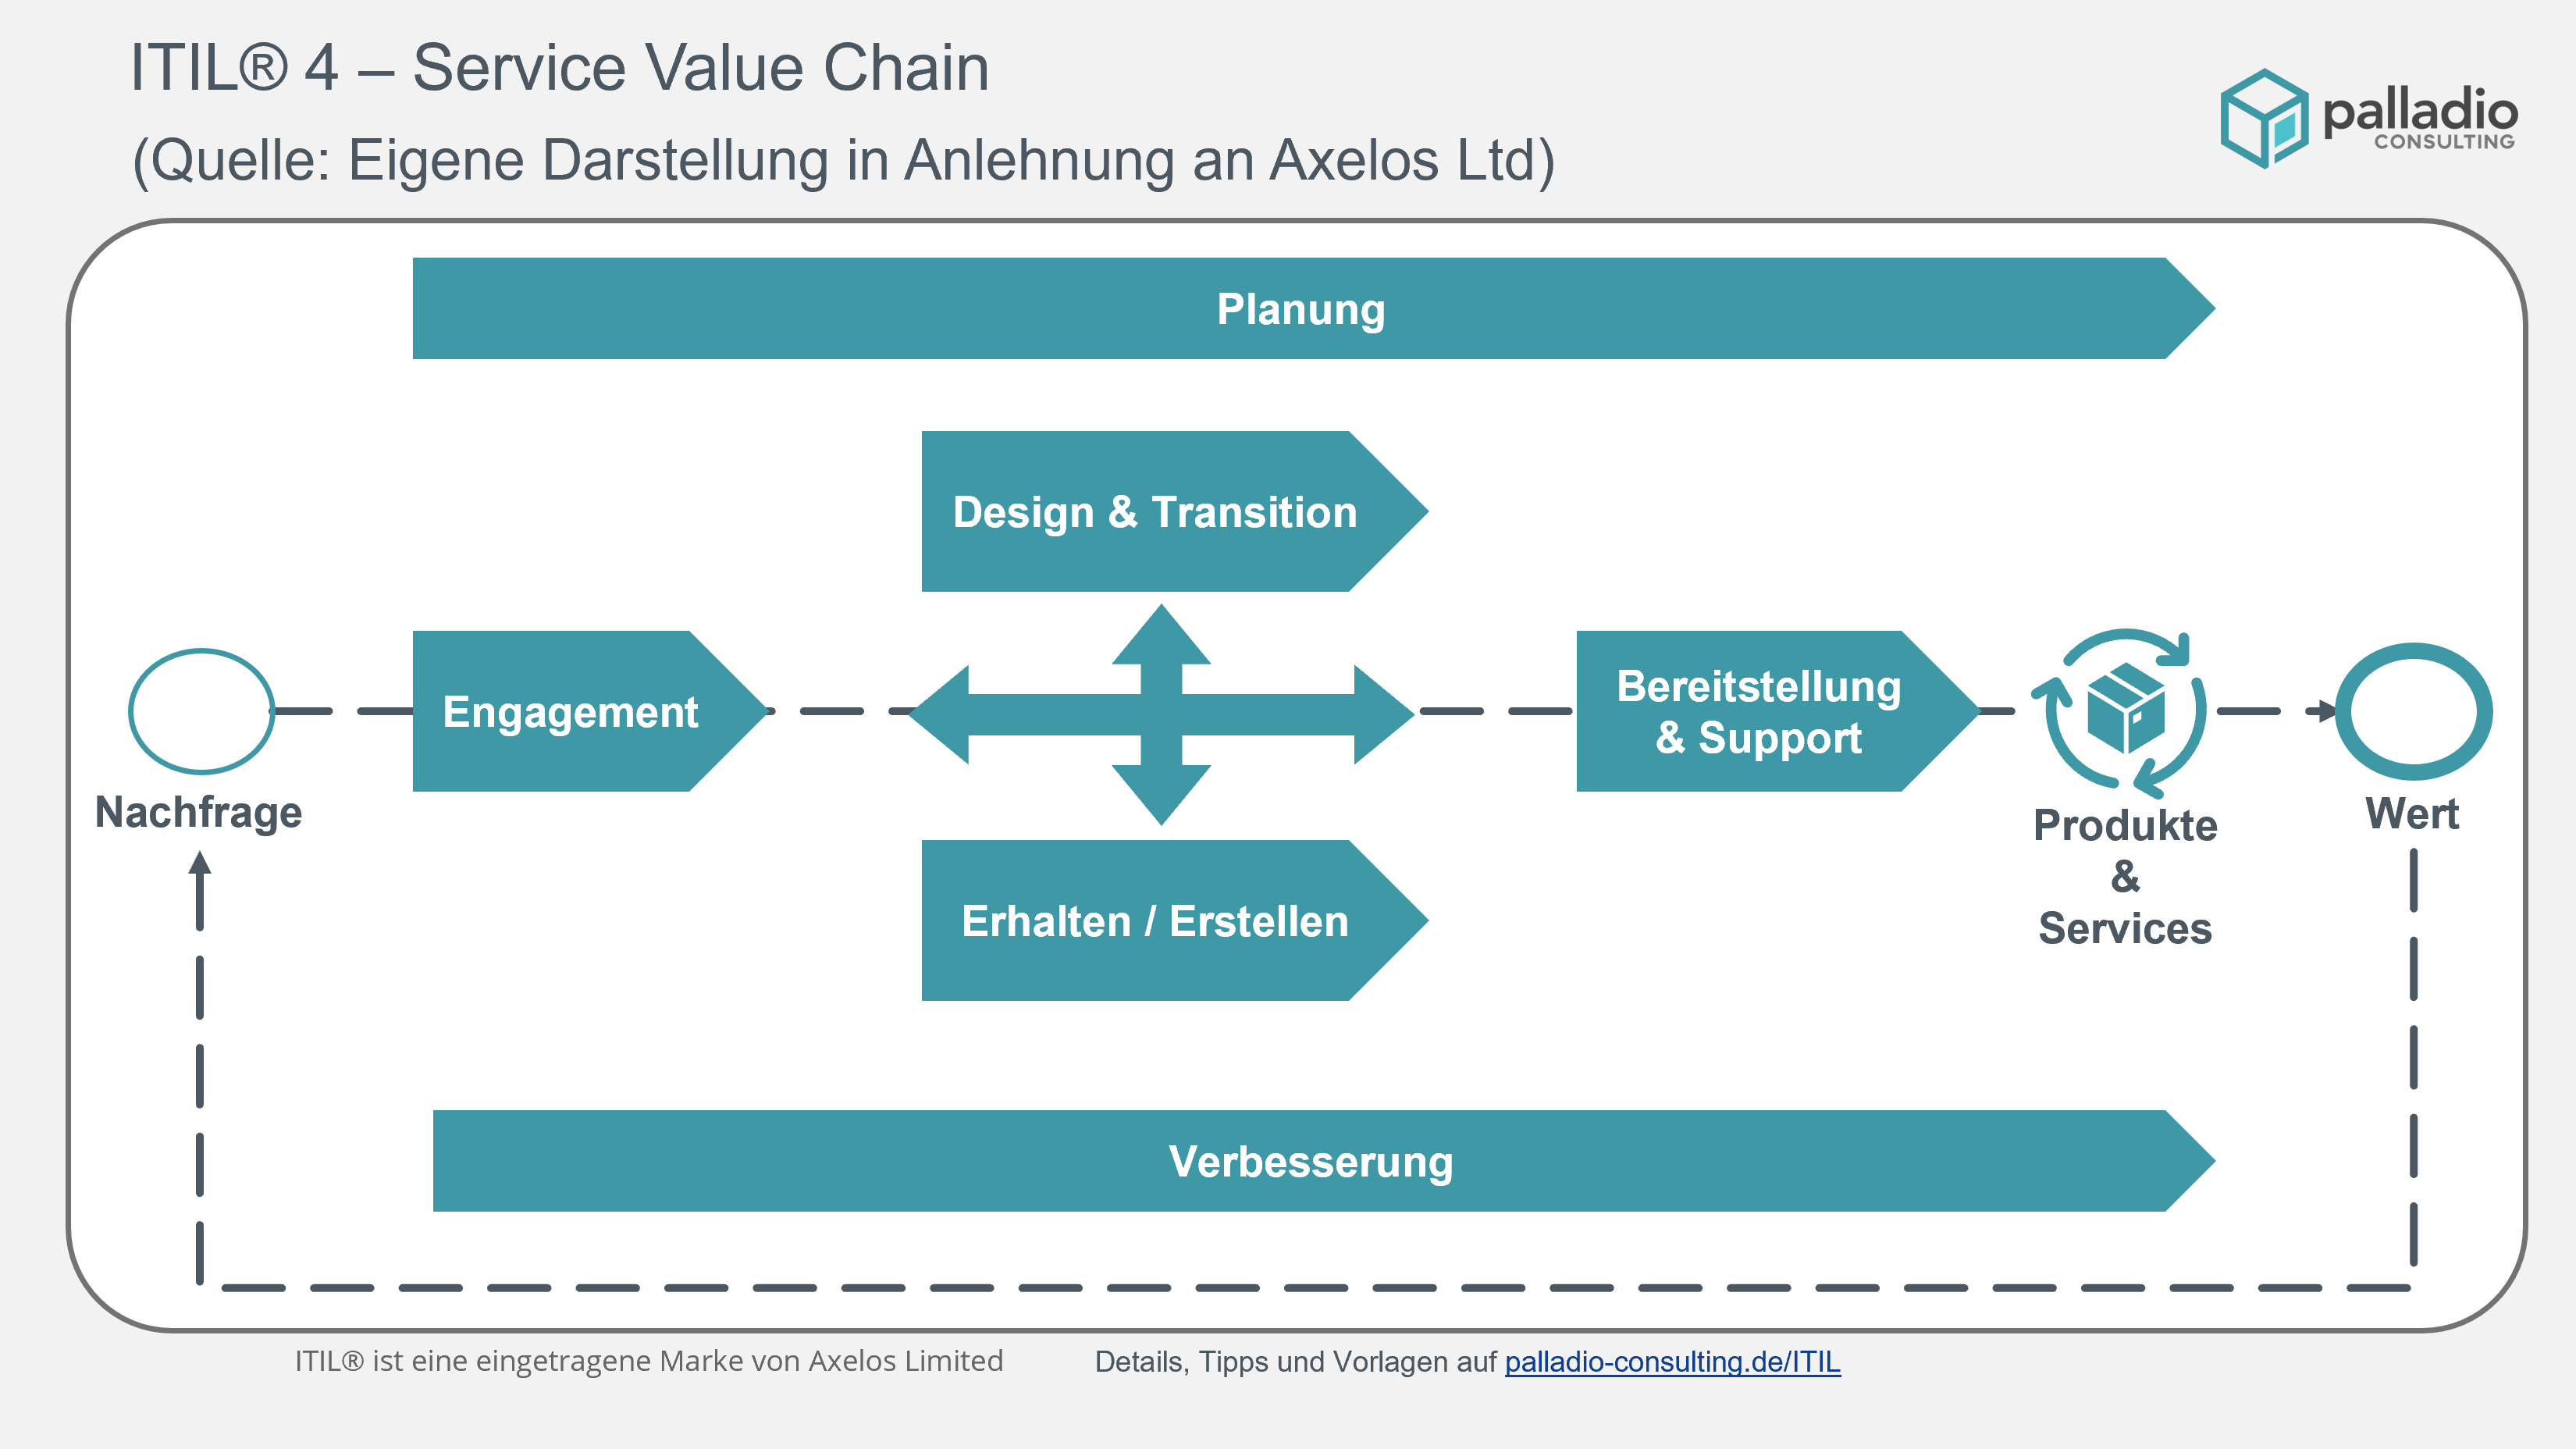 ITIL®4 - Service Value Chain